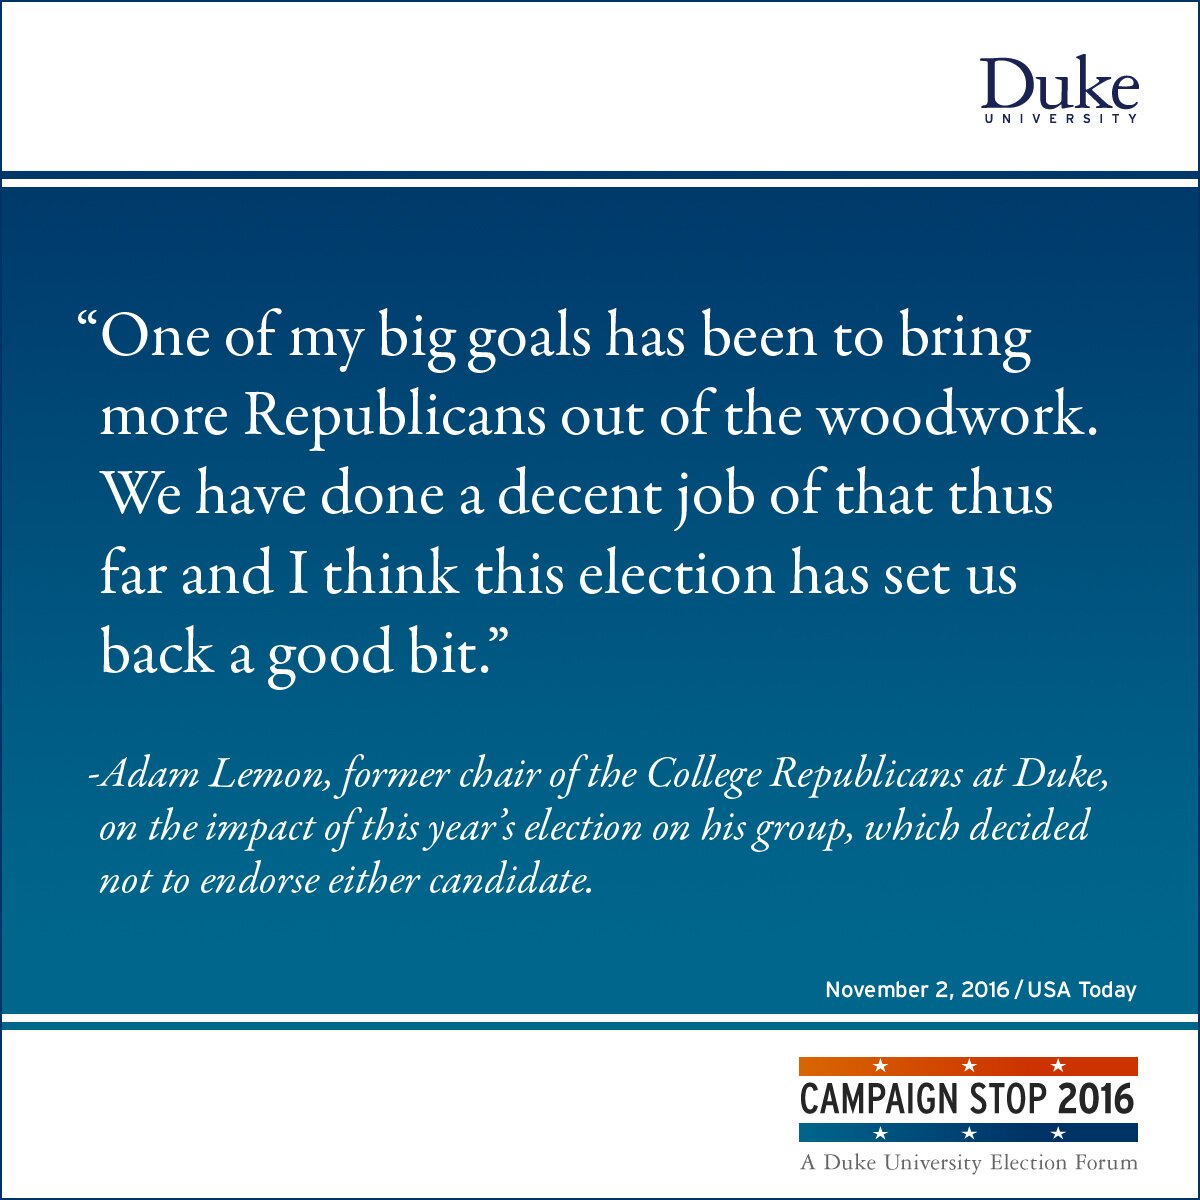 “One of my big goals has been to bring more Republicans out of the woodwork. We have done a decent job of that thus far and I think this election has set us back a good bit.” -Adam Lemon, former chair of the College Republicans at Duke, on the impact of this year’s election on his group, which decided not to endorse either candidate.